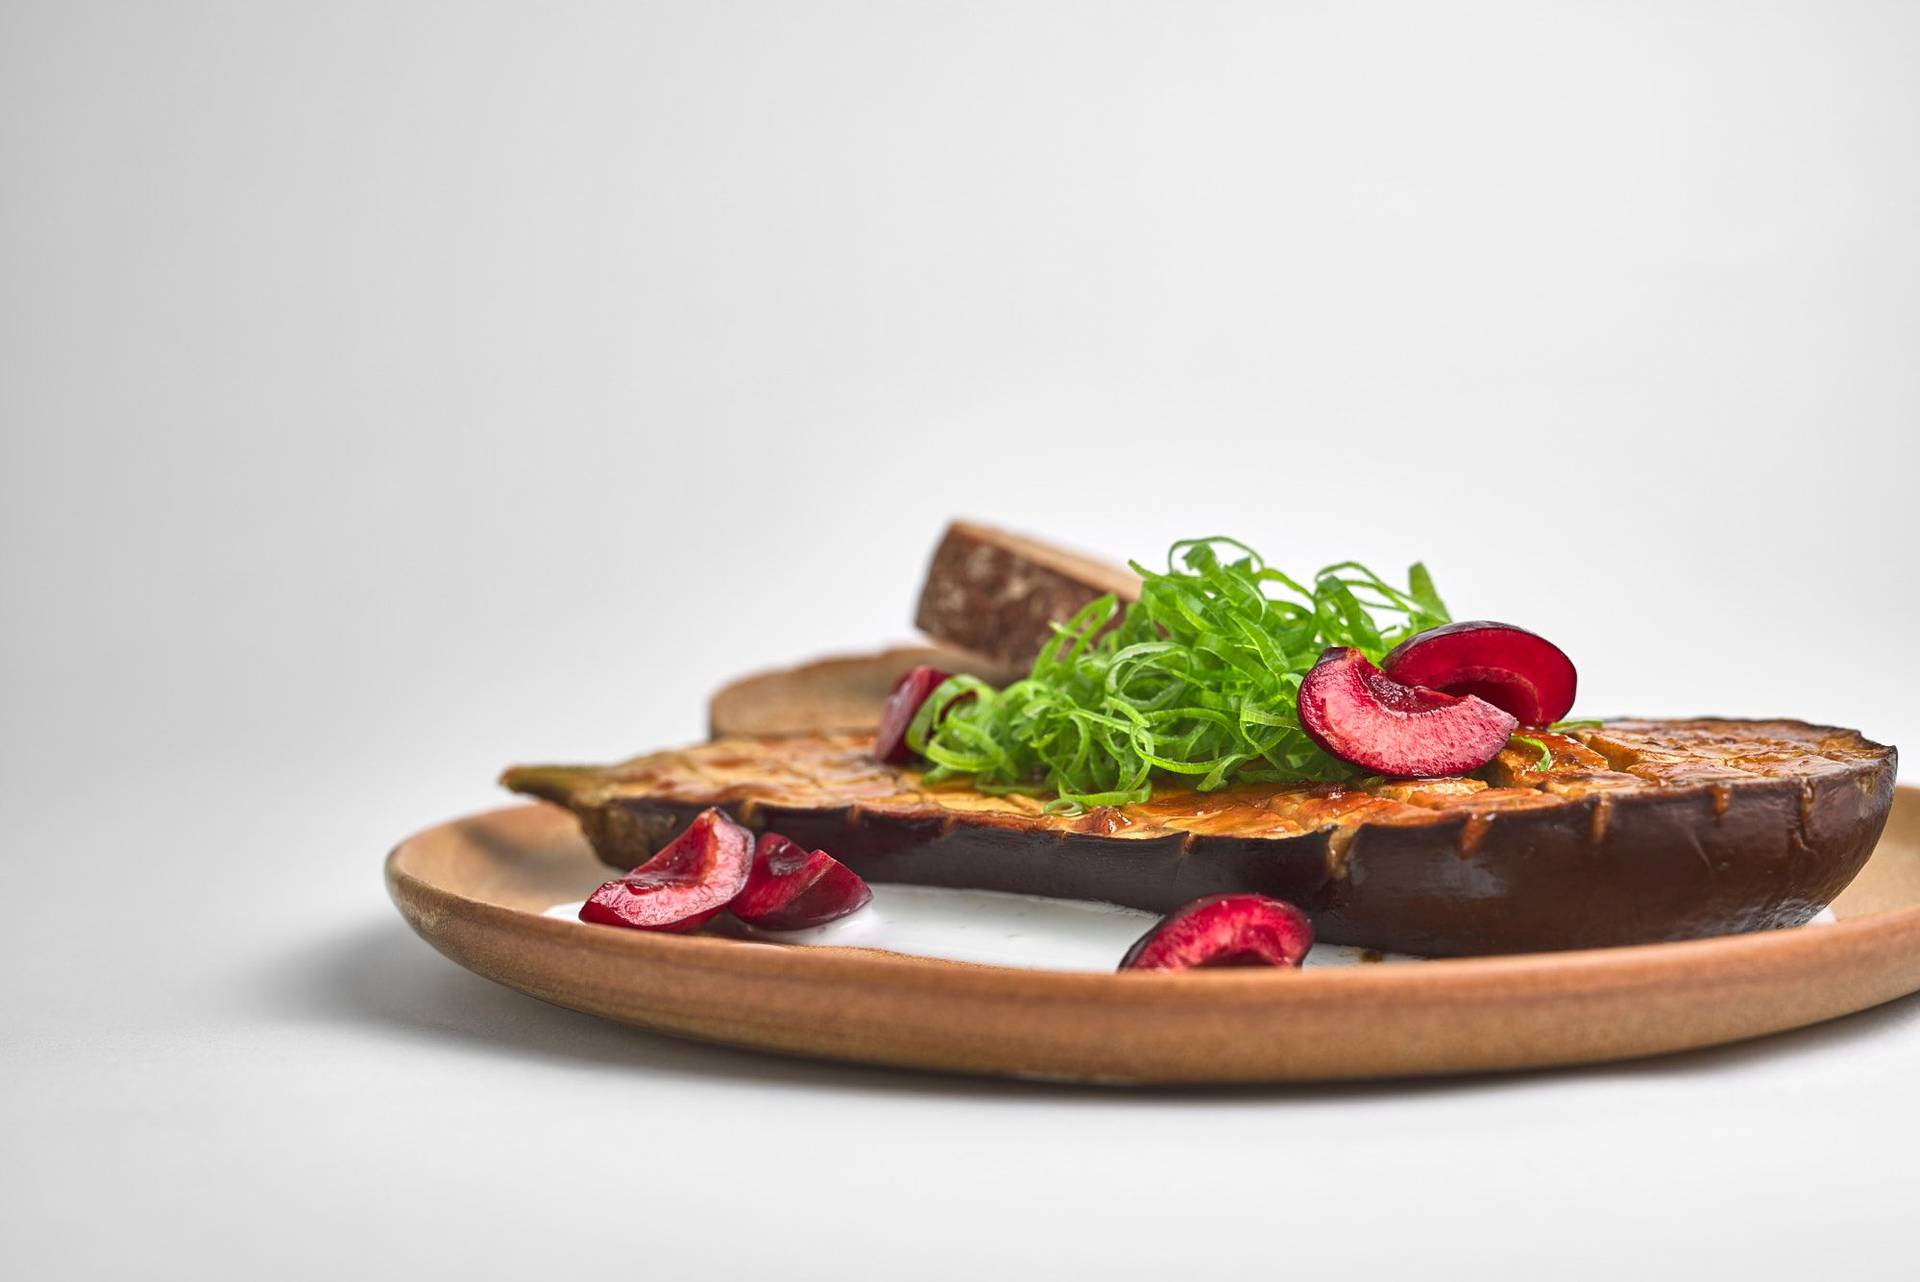 miso roasted eggplant with kefir cherries and sourdough bread on a brown ceramic plate with white background